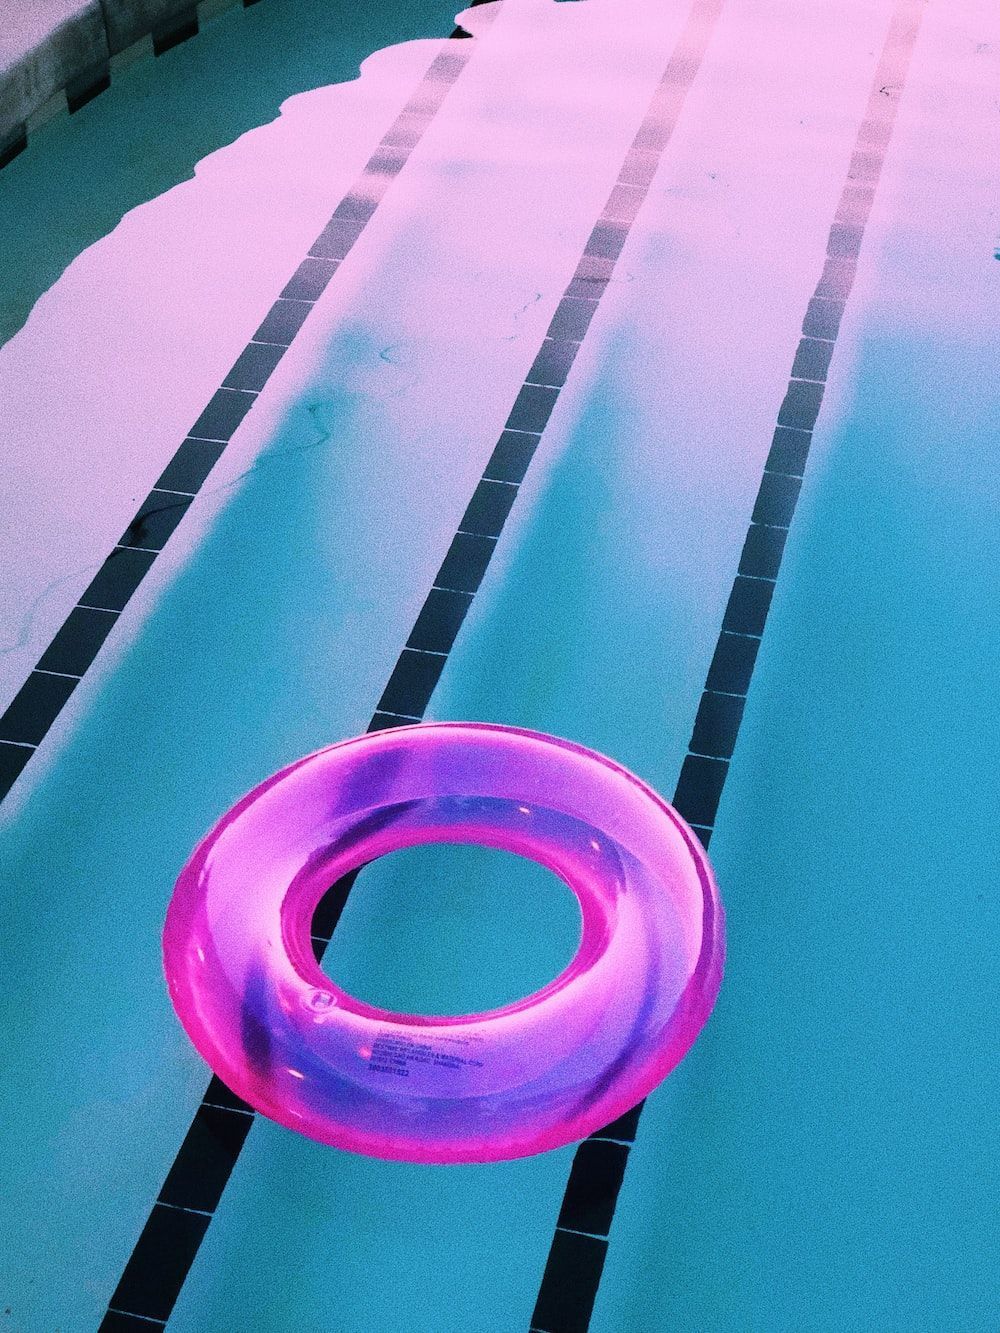 A pink inflatable ring floating on a pool - Swimming pool